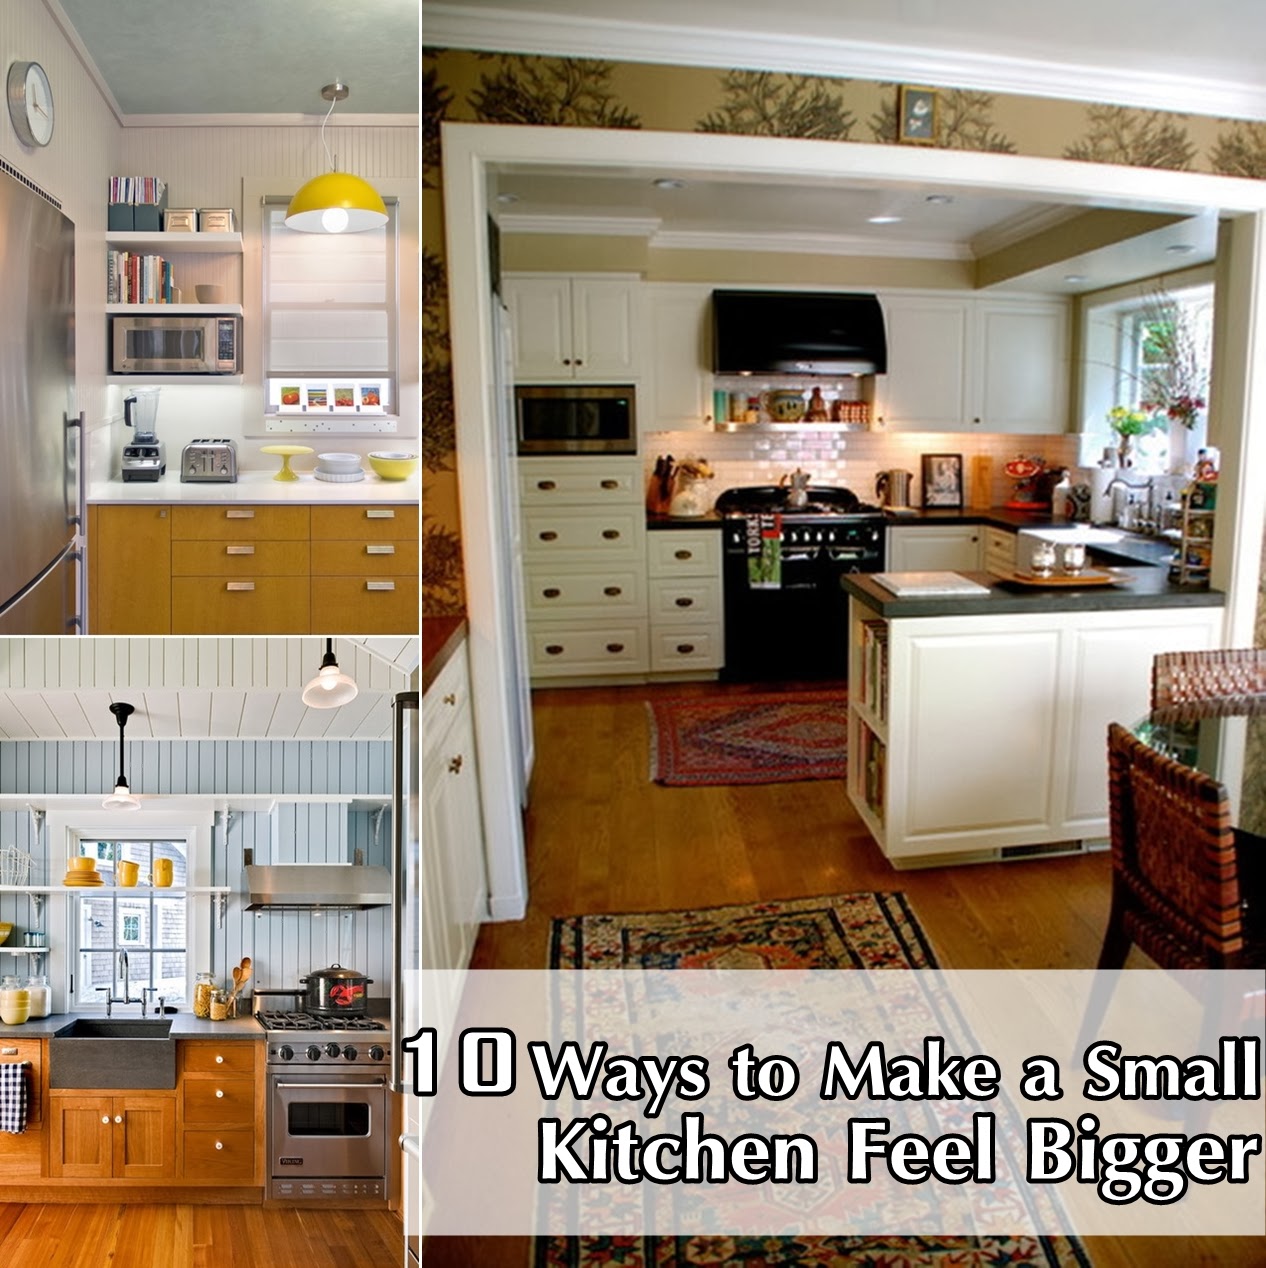 10 Ways to Make a Small Kitchen Feel Bigger - DIY Craft Projects